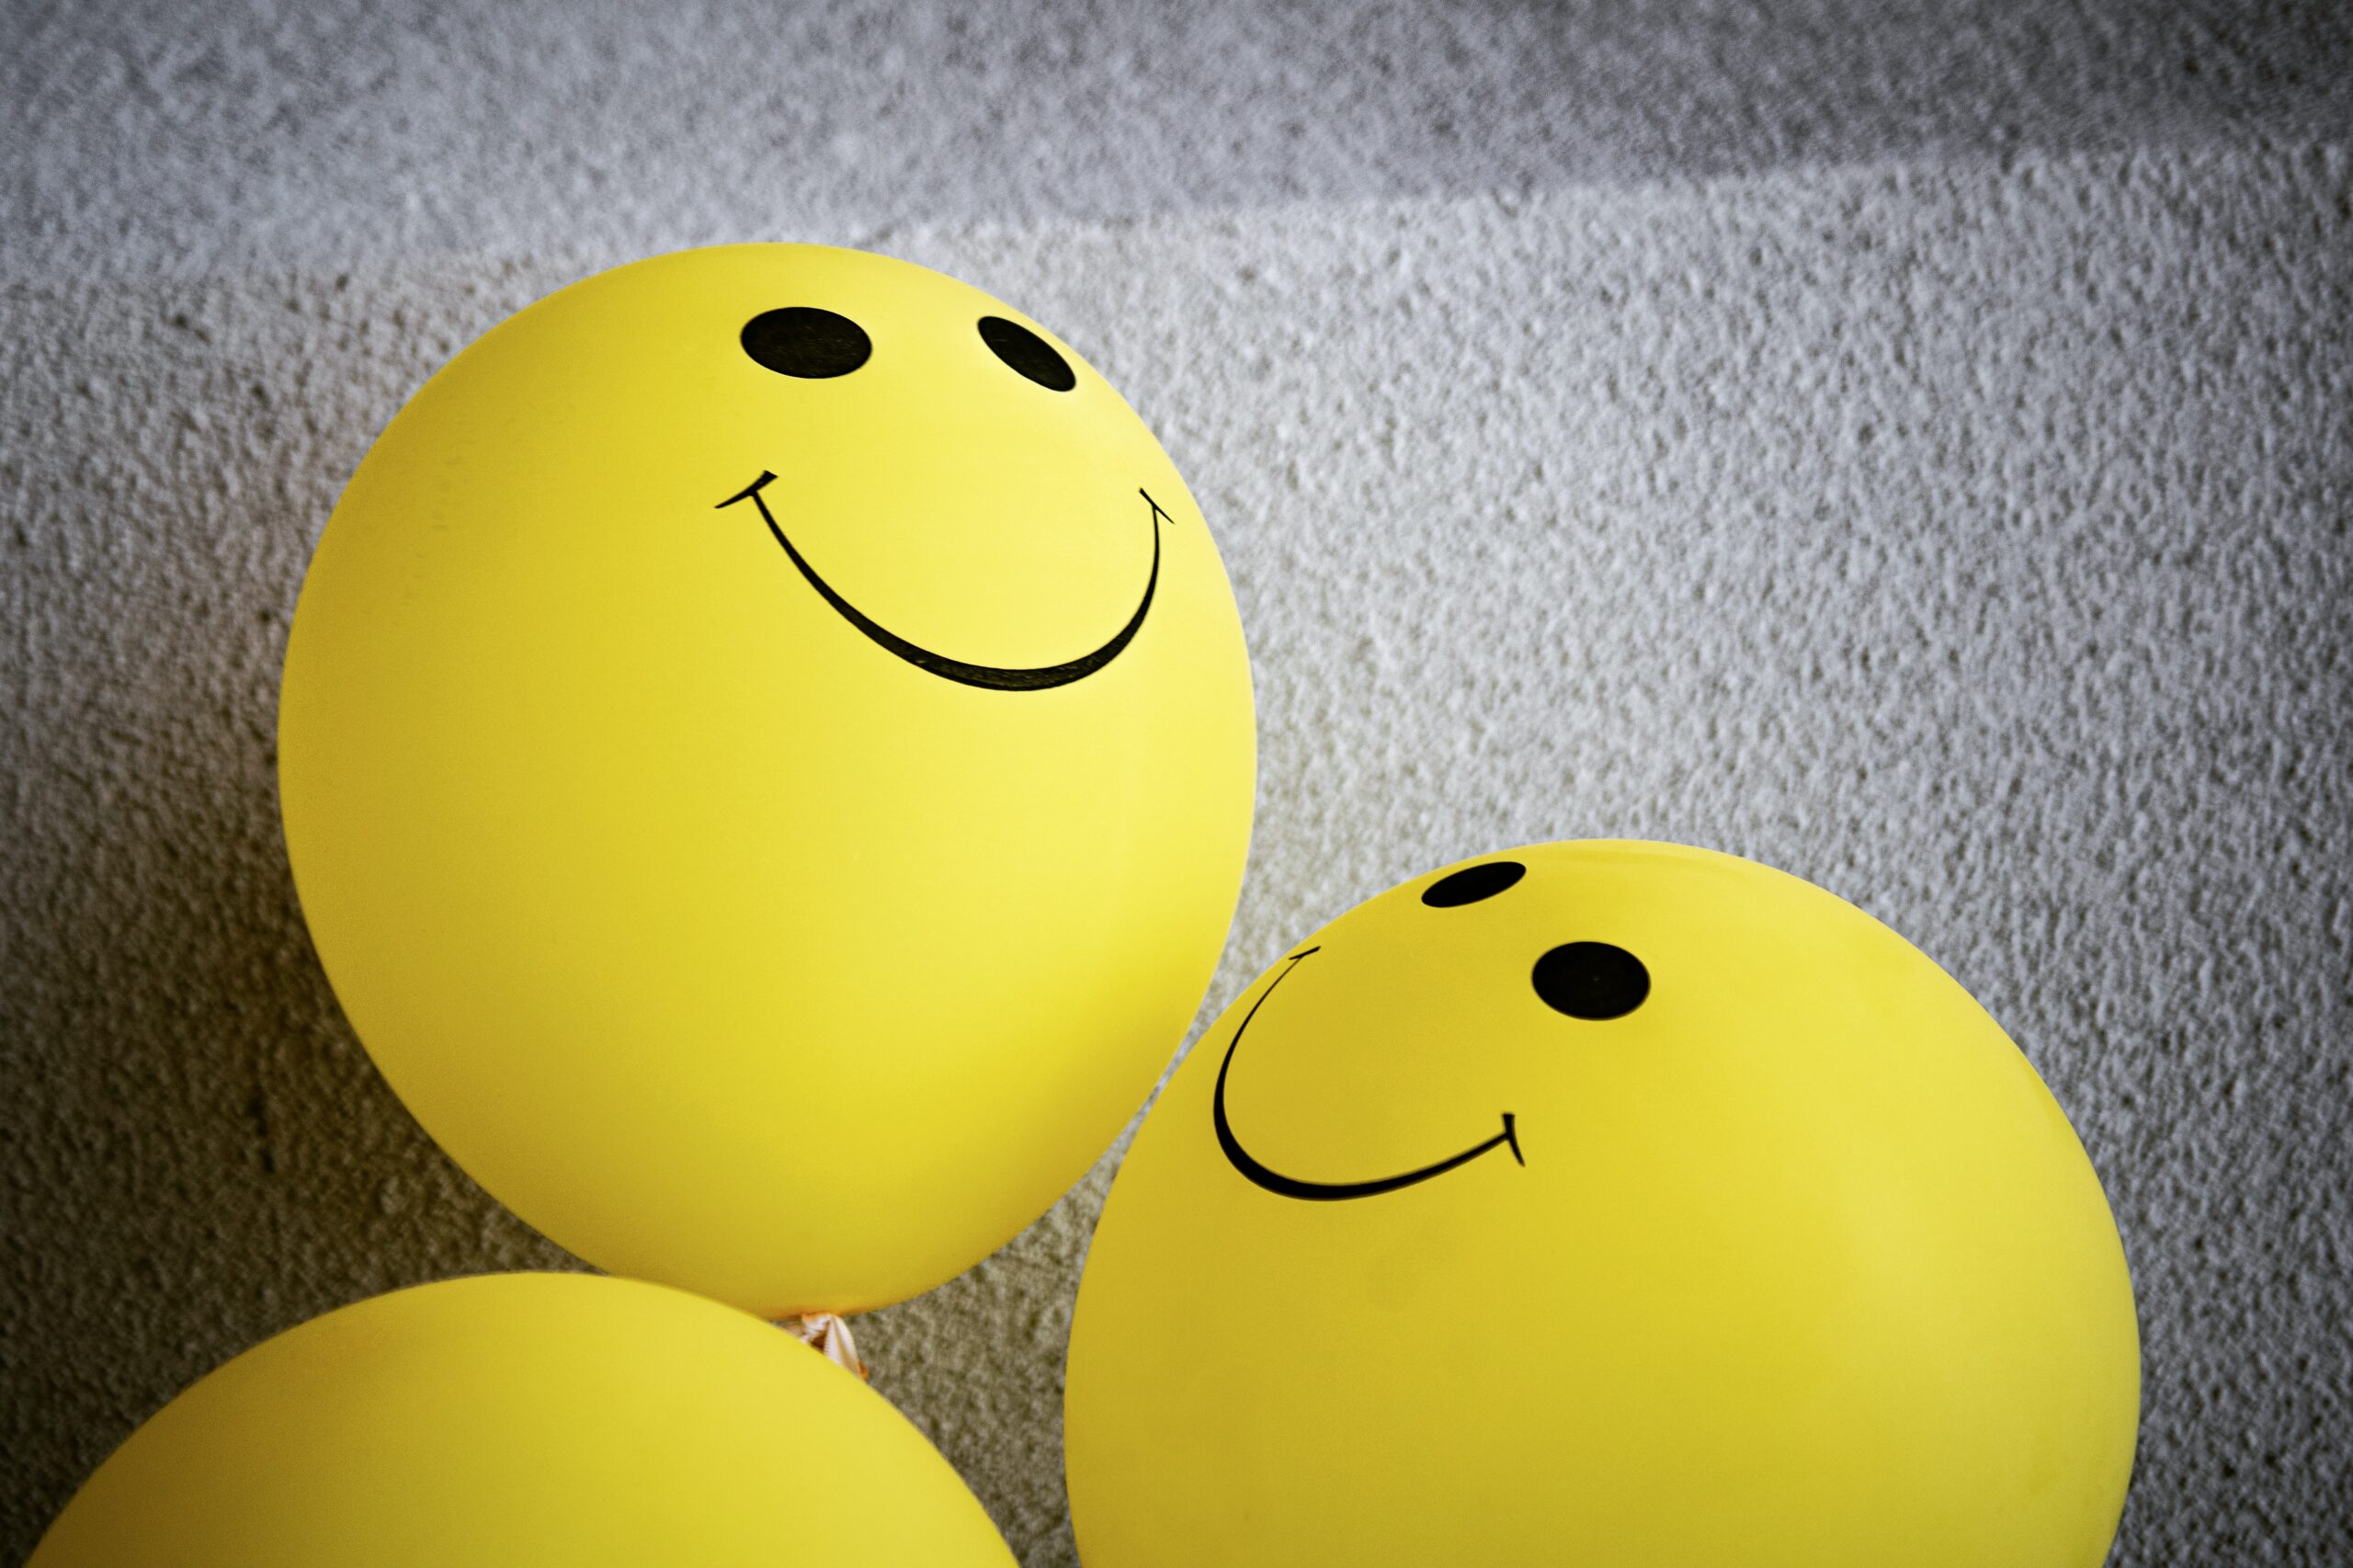 3 yellow balloons with smiley faces on them